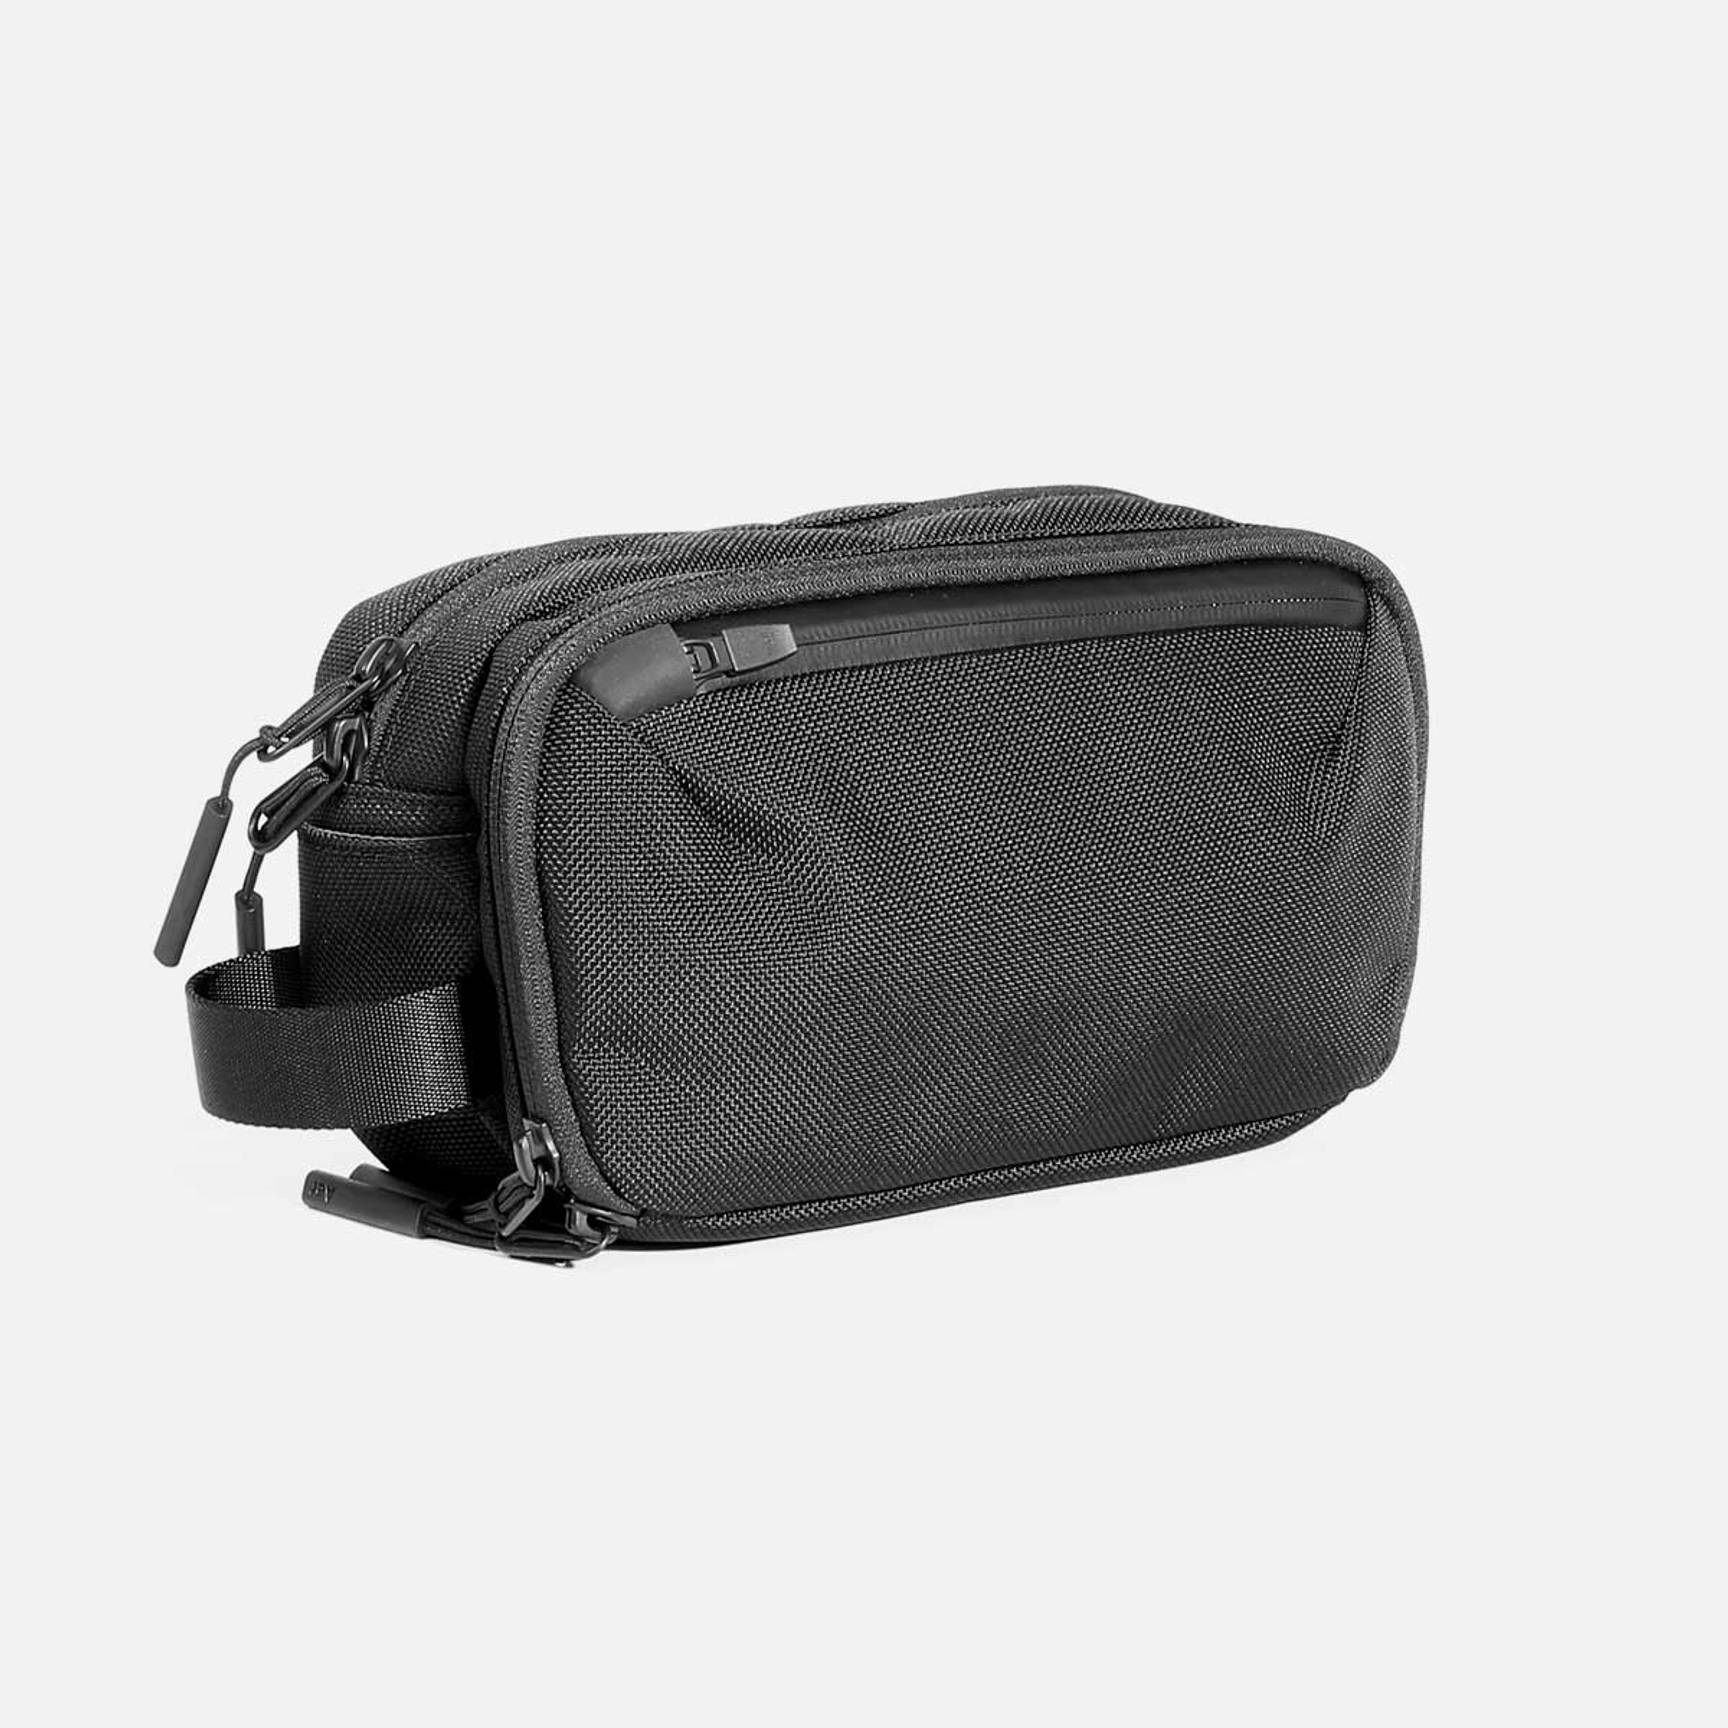 16 Best Dopp Kits and Toiletry Bags for Men in 2023